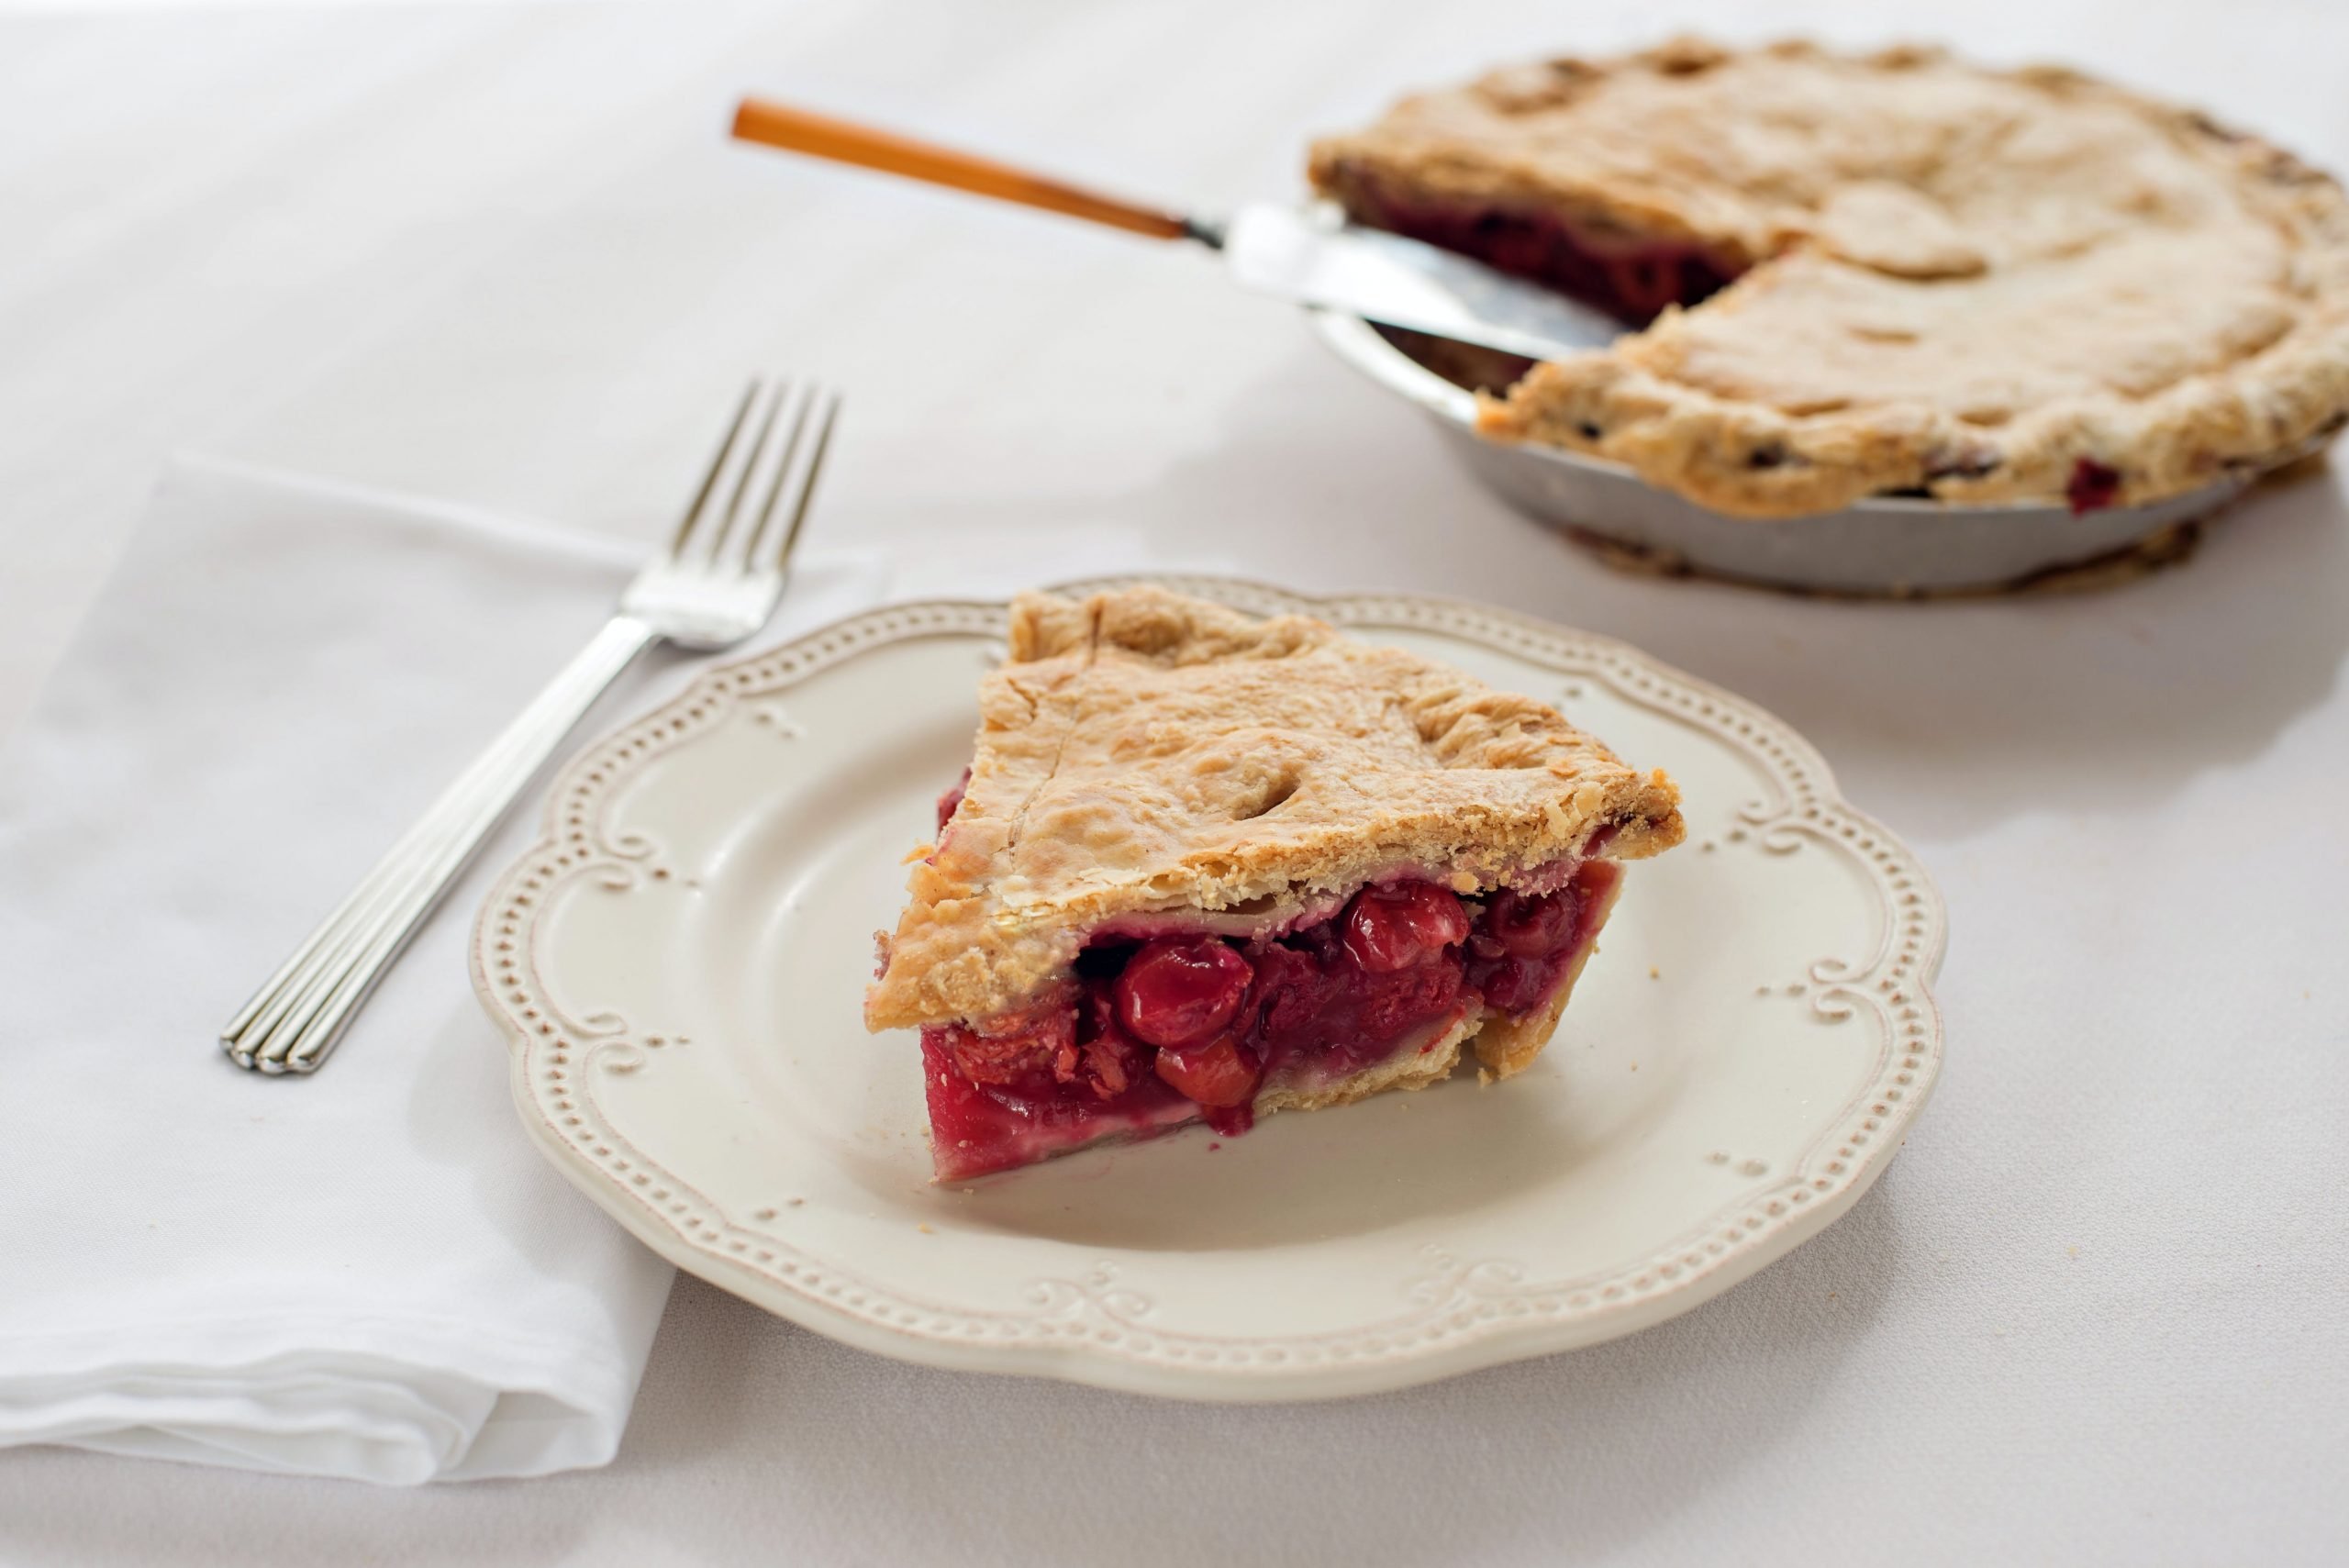 Old Mission Cherry Pie by Grand Traverse Pie Company ...